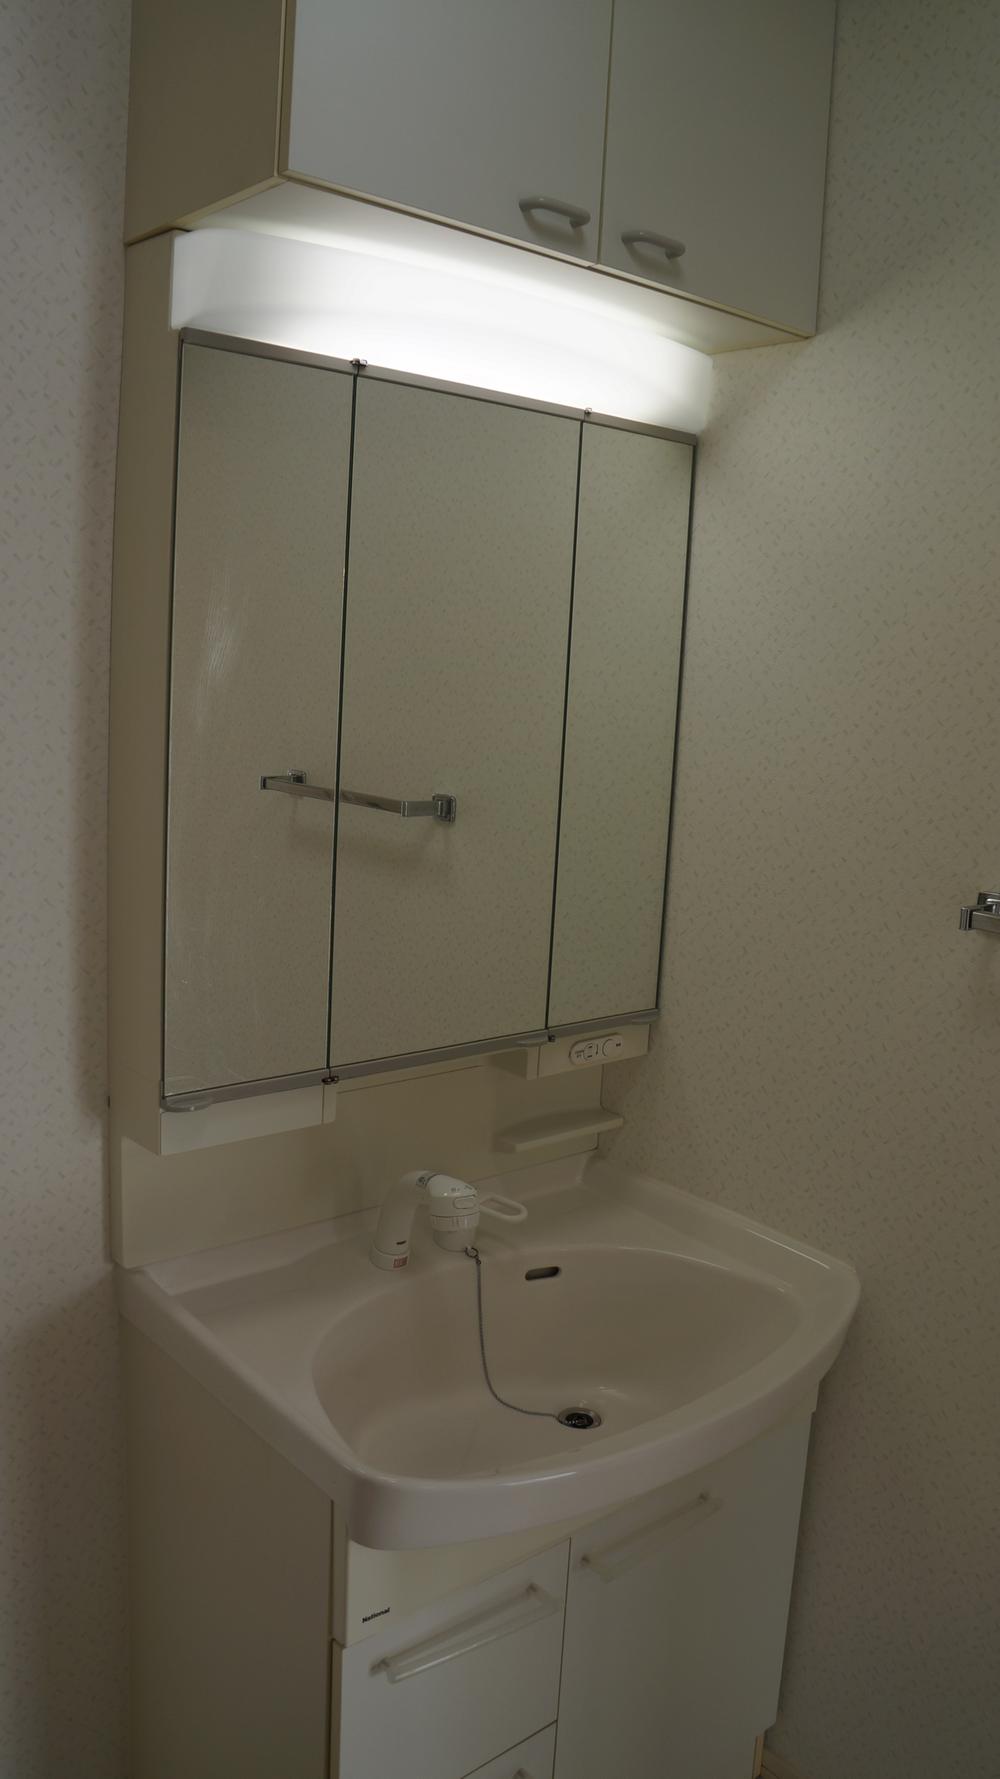 Wash basin, toilet. Vanity with a three-sided mirror